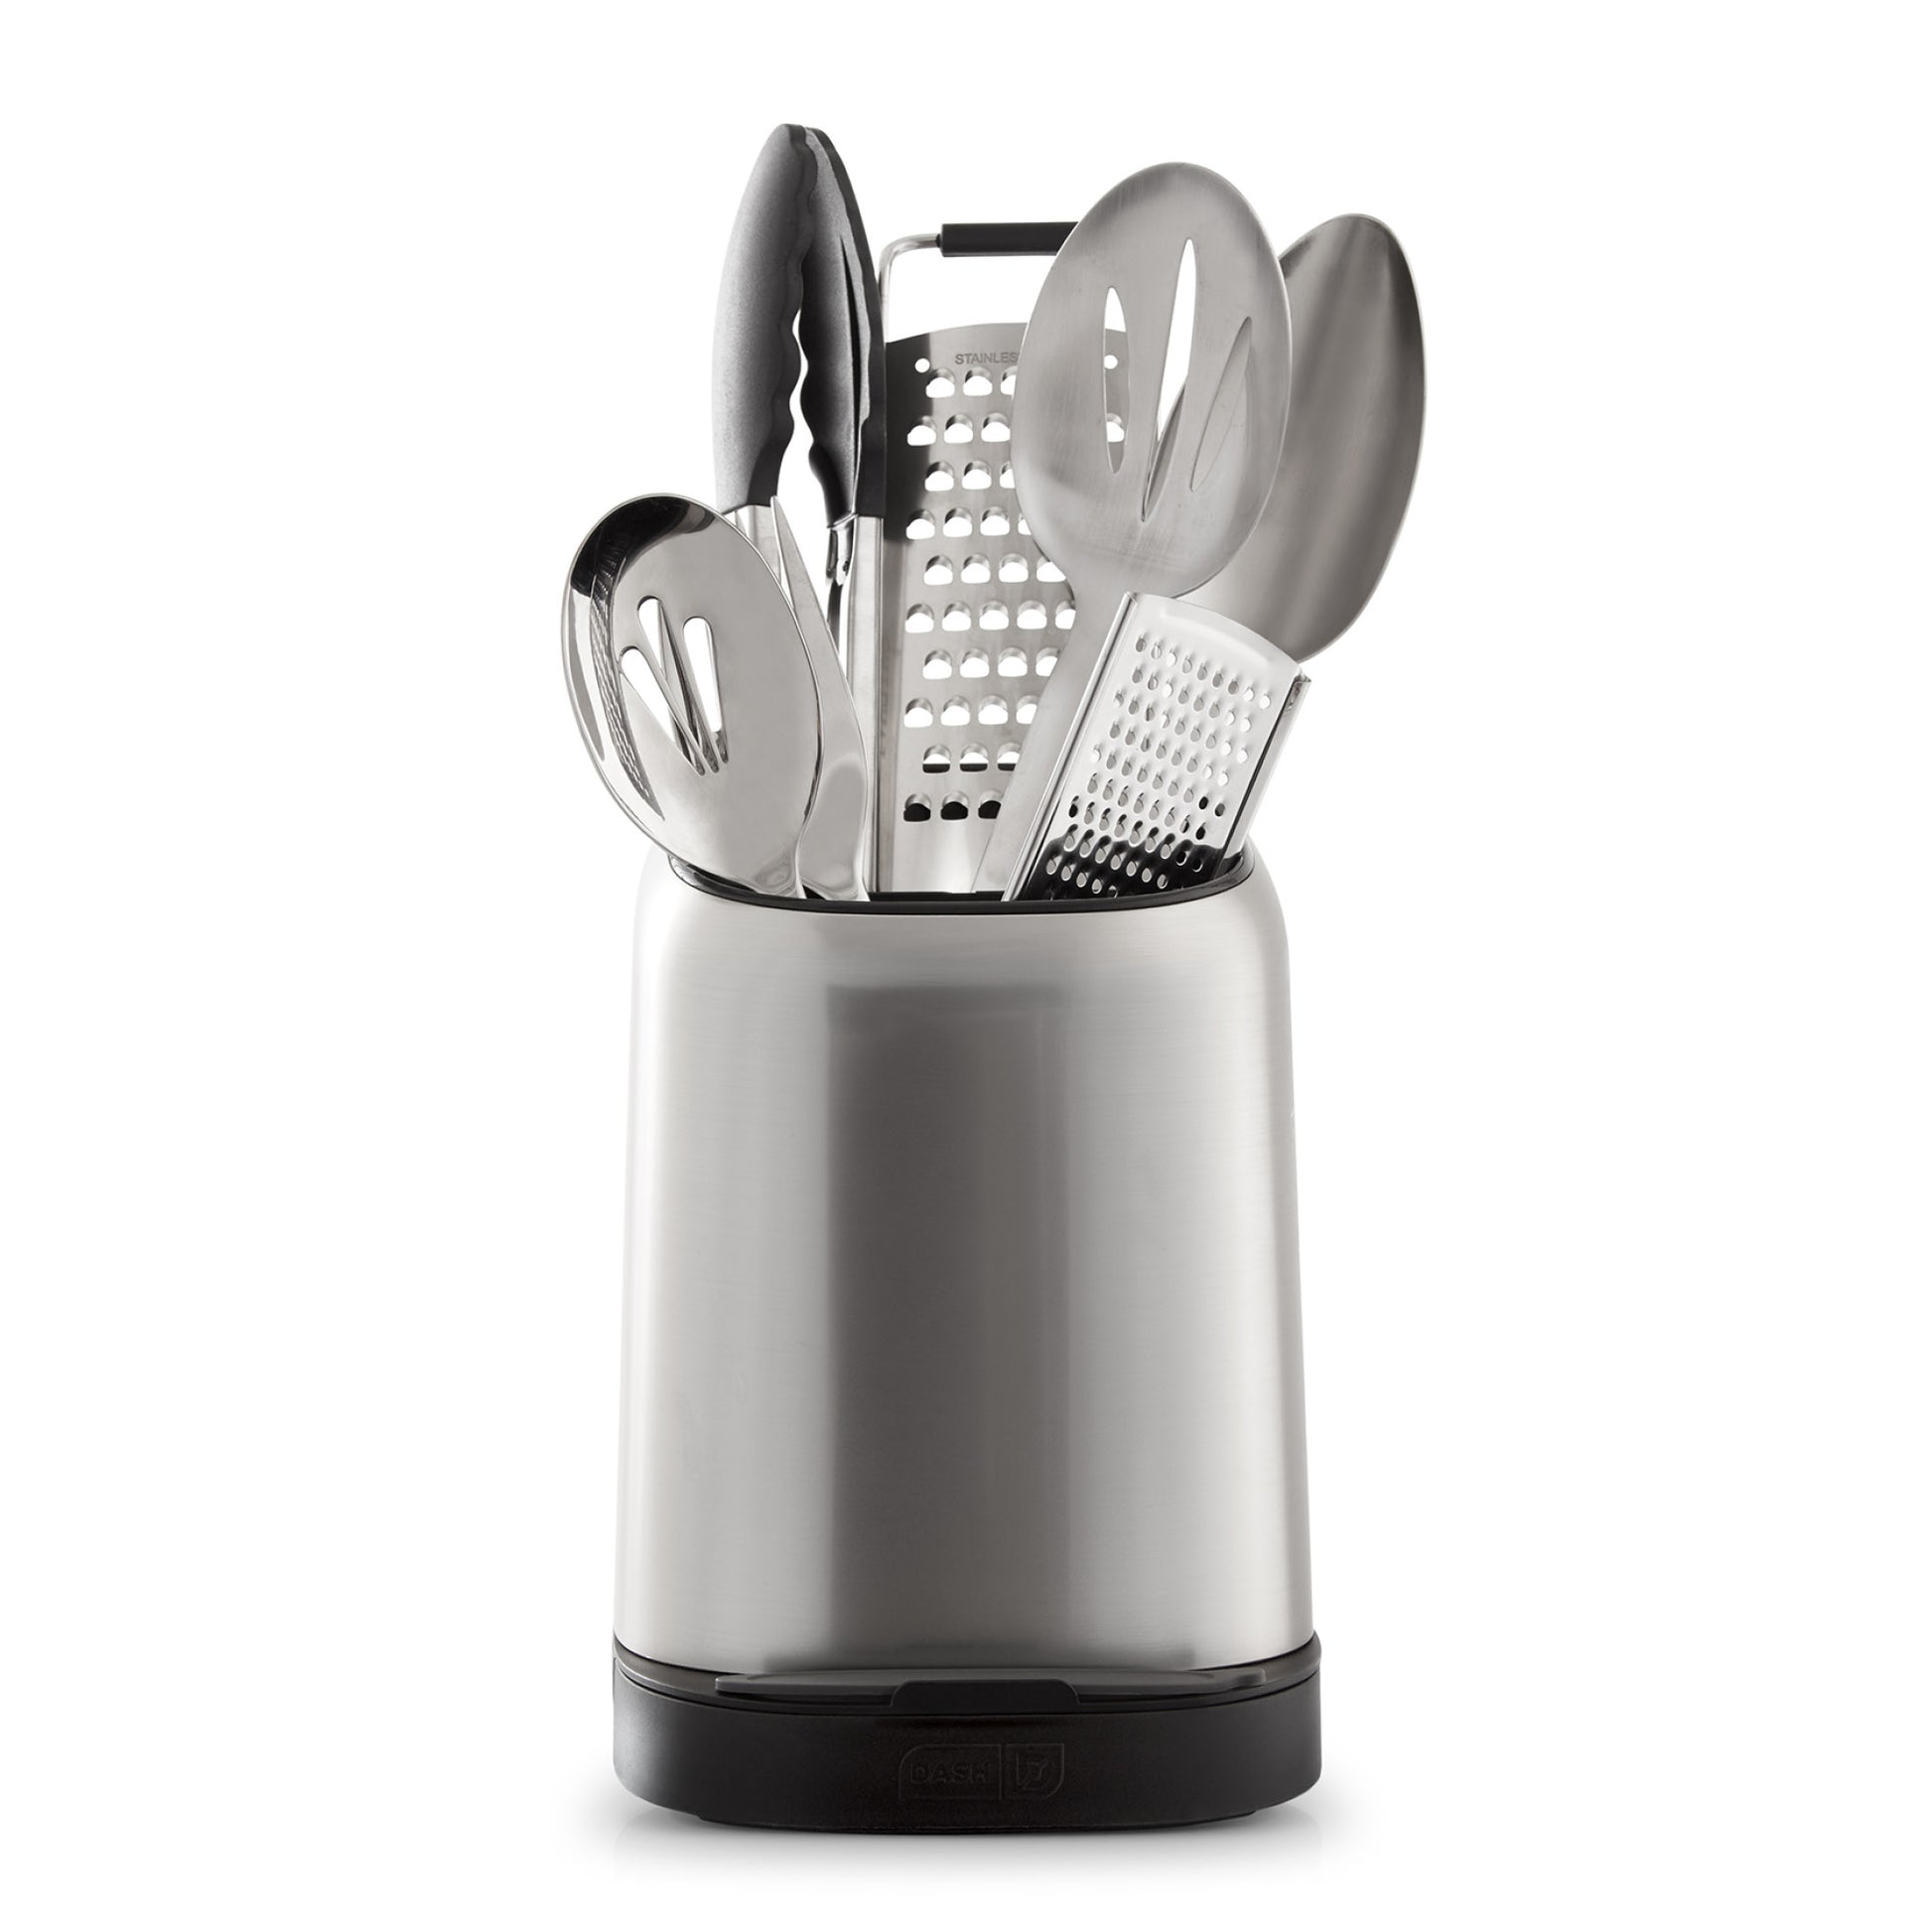 Kitchen Utensil Review - The Best OXO Kitchen Tools for Under $50